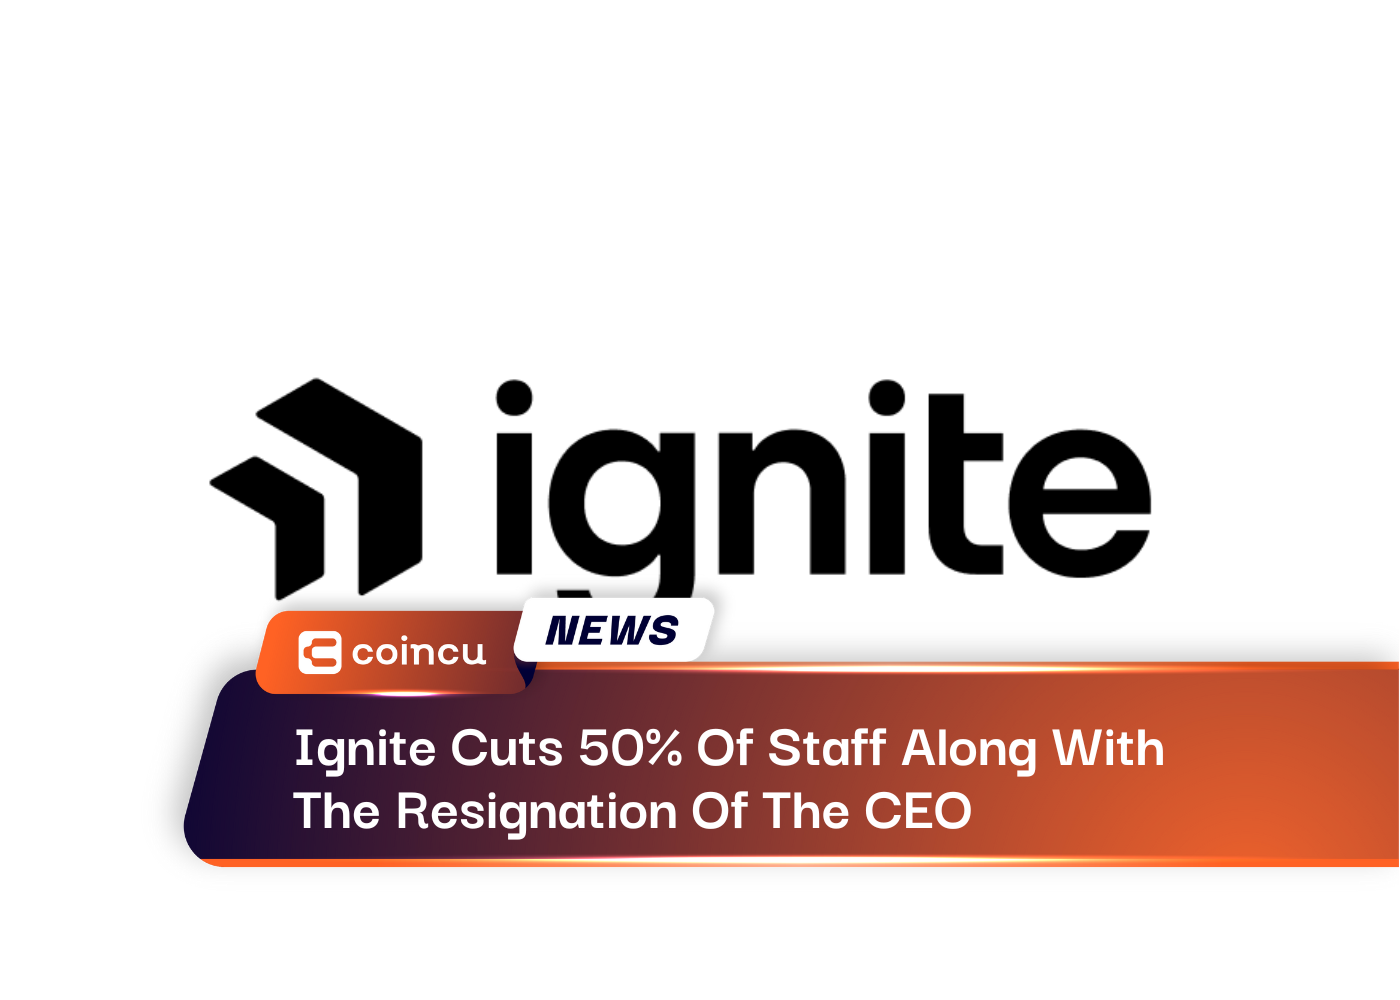 Ignite Cuts 50% Of Staff Along With The Resignation Of The CEO